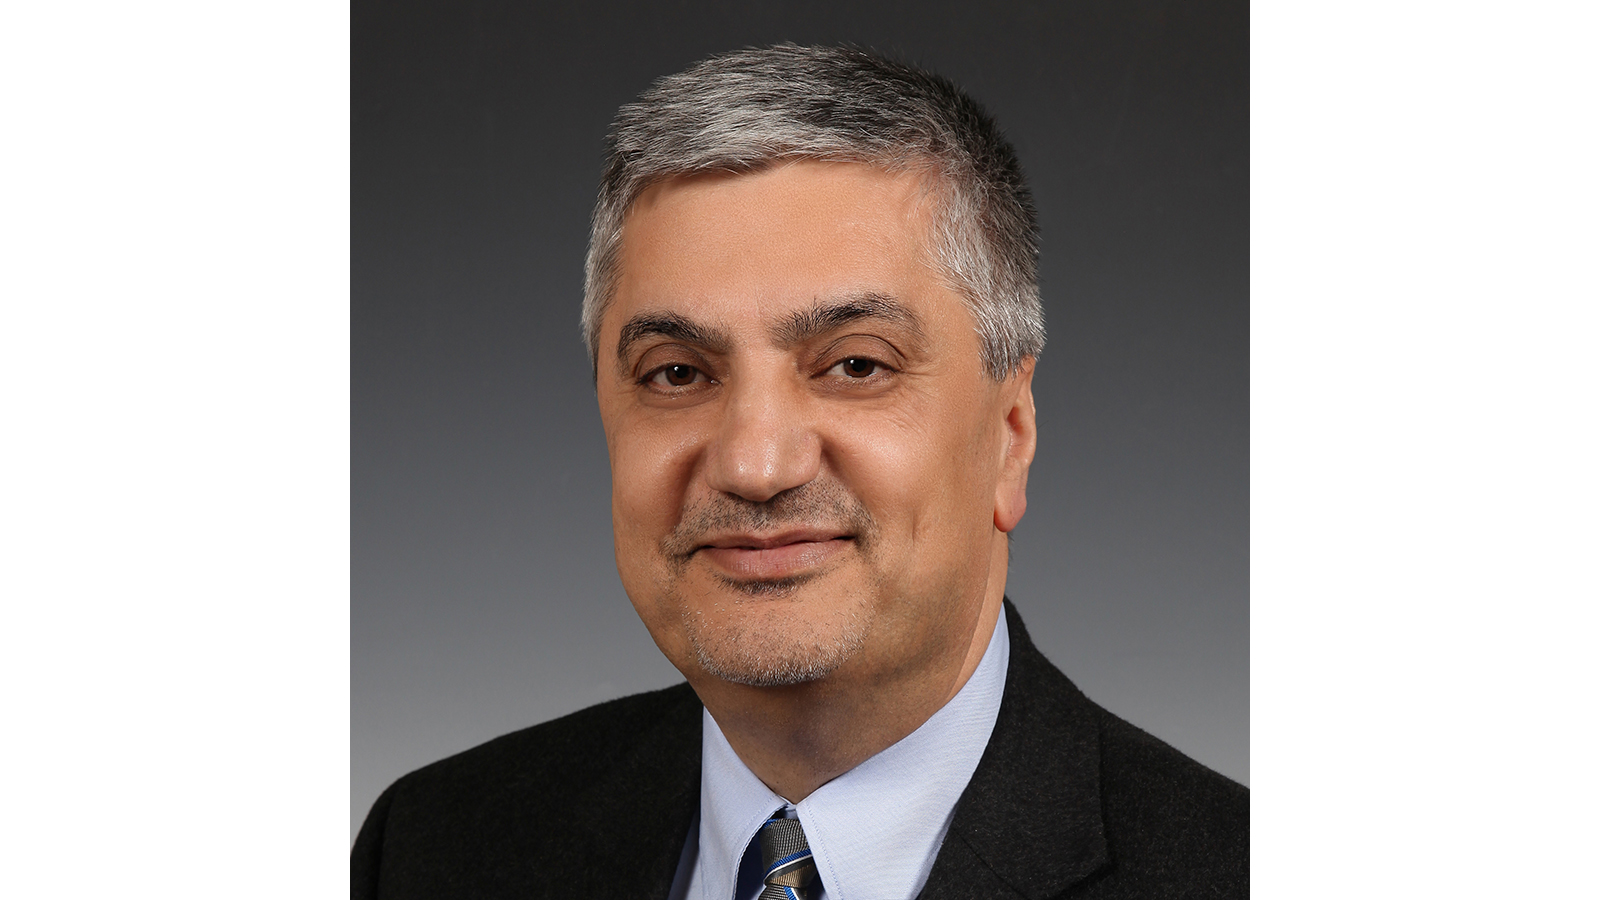 Chaouki T. Abdallah will be Georgia Tech's new executive vice president for research. (Credit: University of New Mexico)